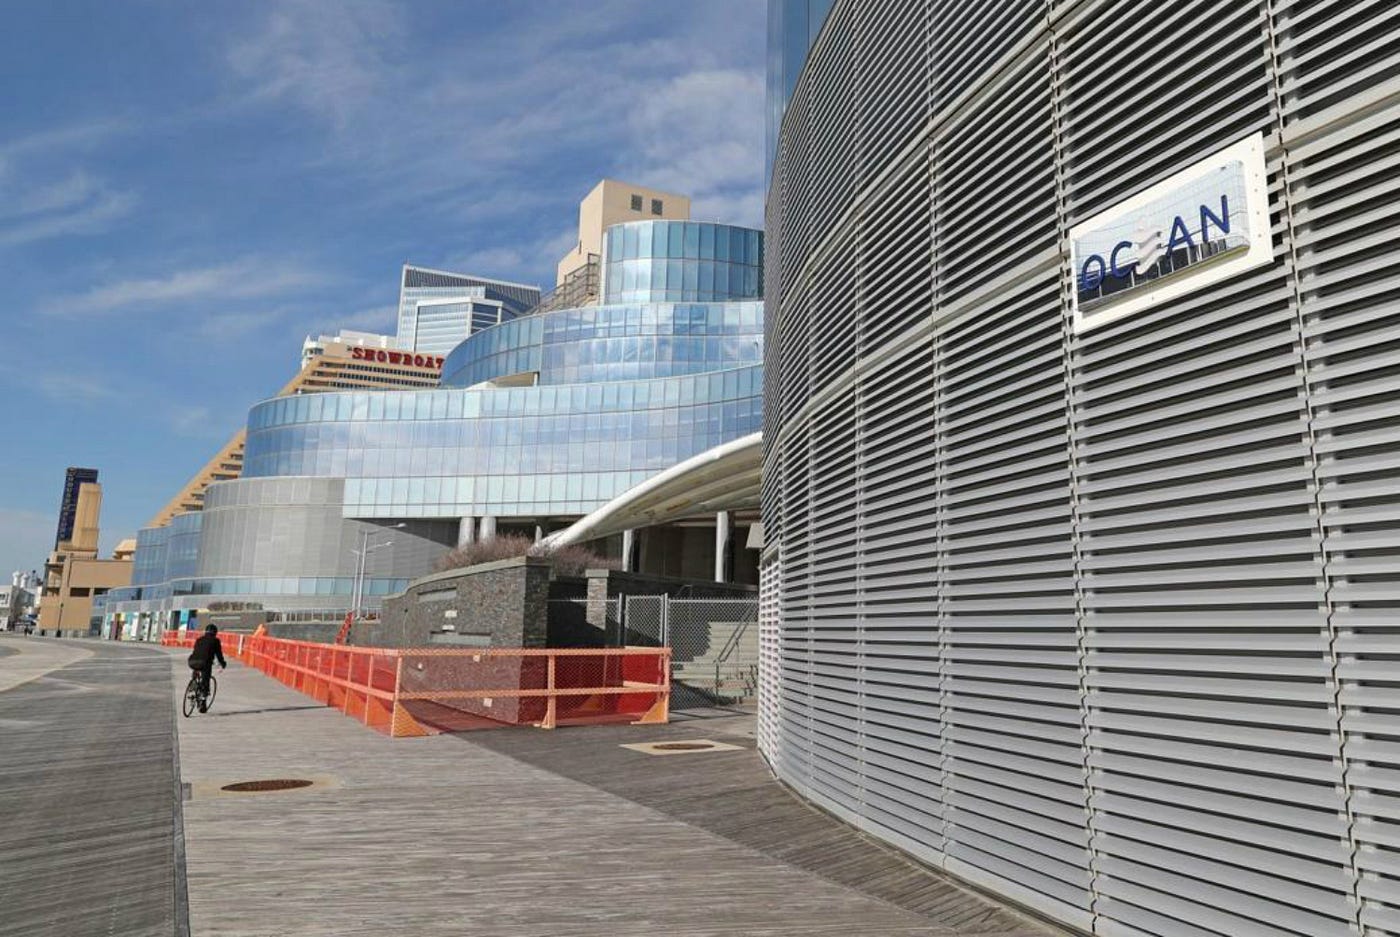 Ocean Resort Casino In Atlantic City Set To Open June 28th by The New York Exclusive by Columnist, Tony Bowles Medium